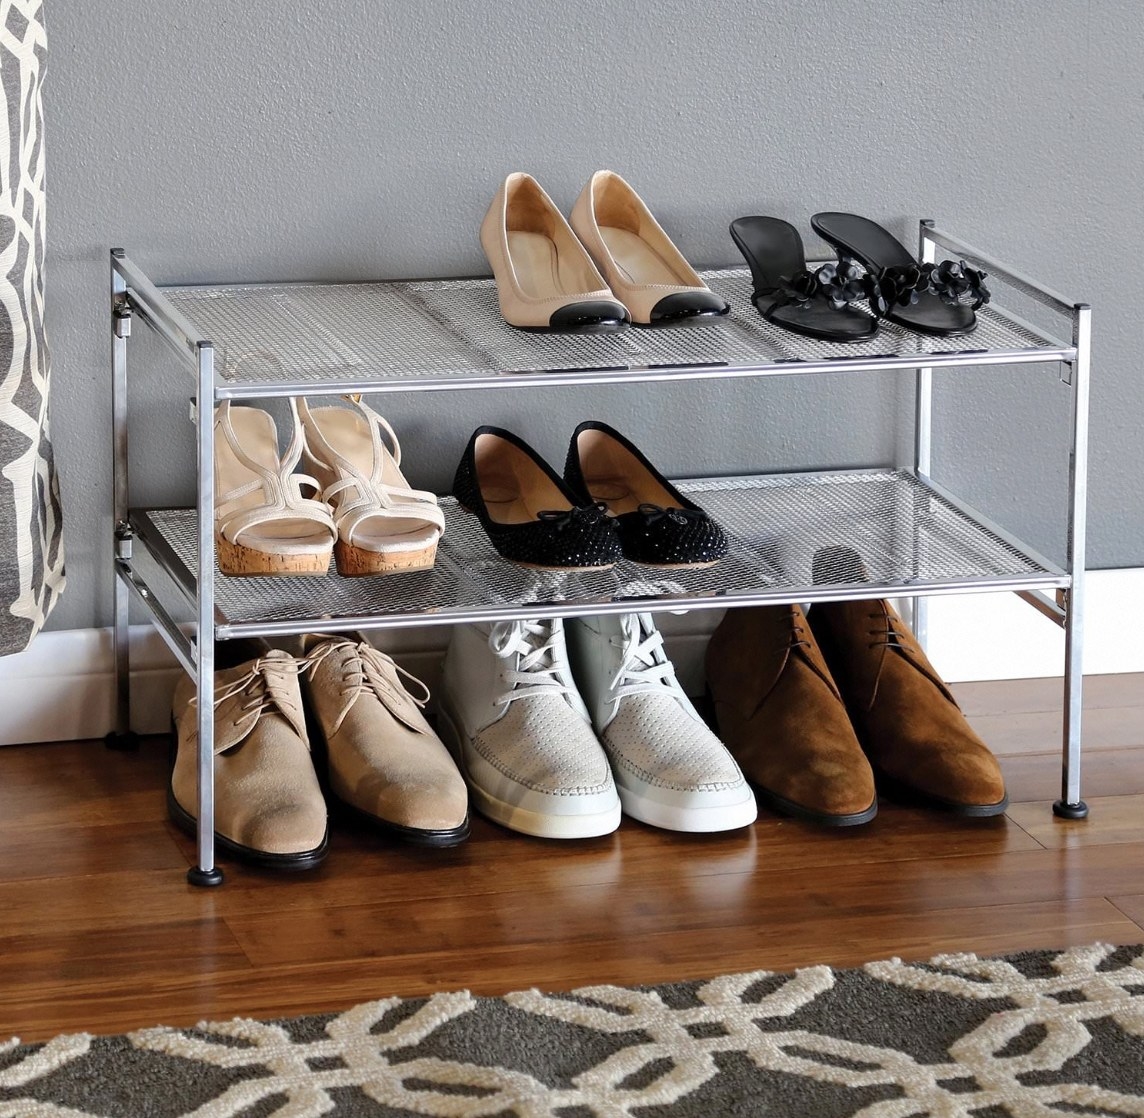 The two-tier shoe rack